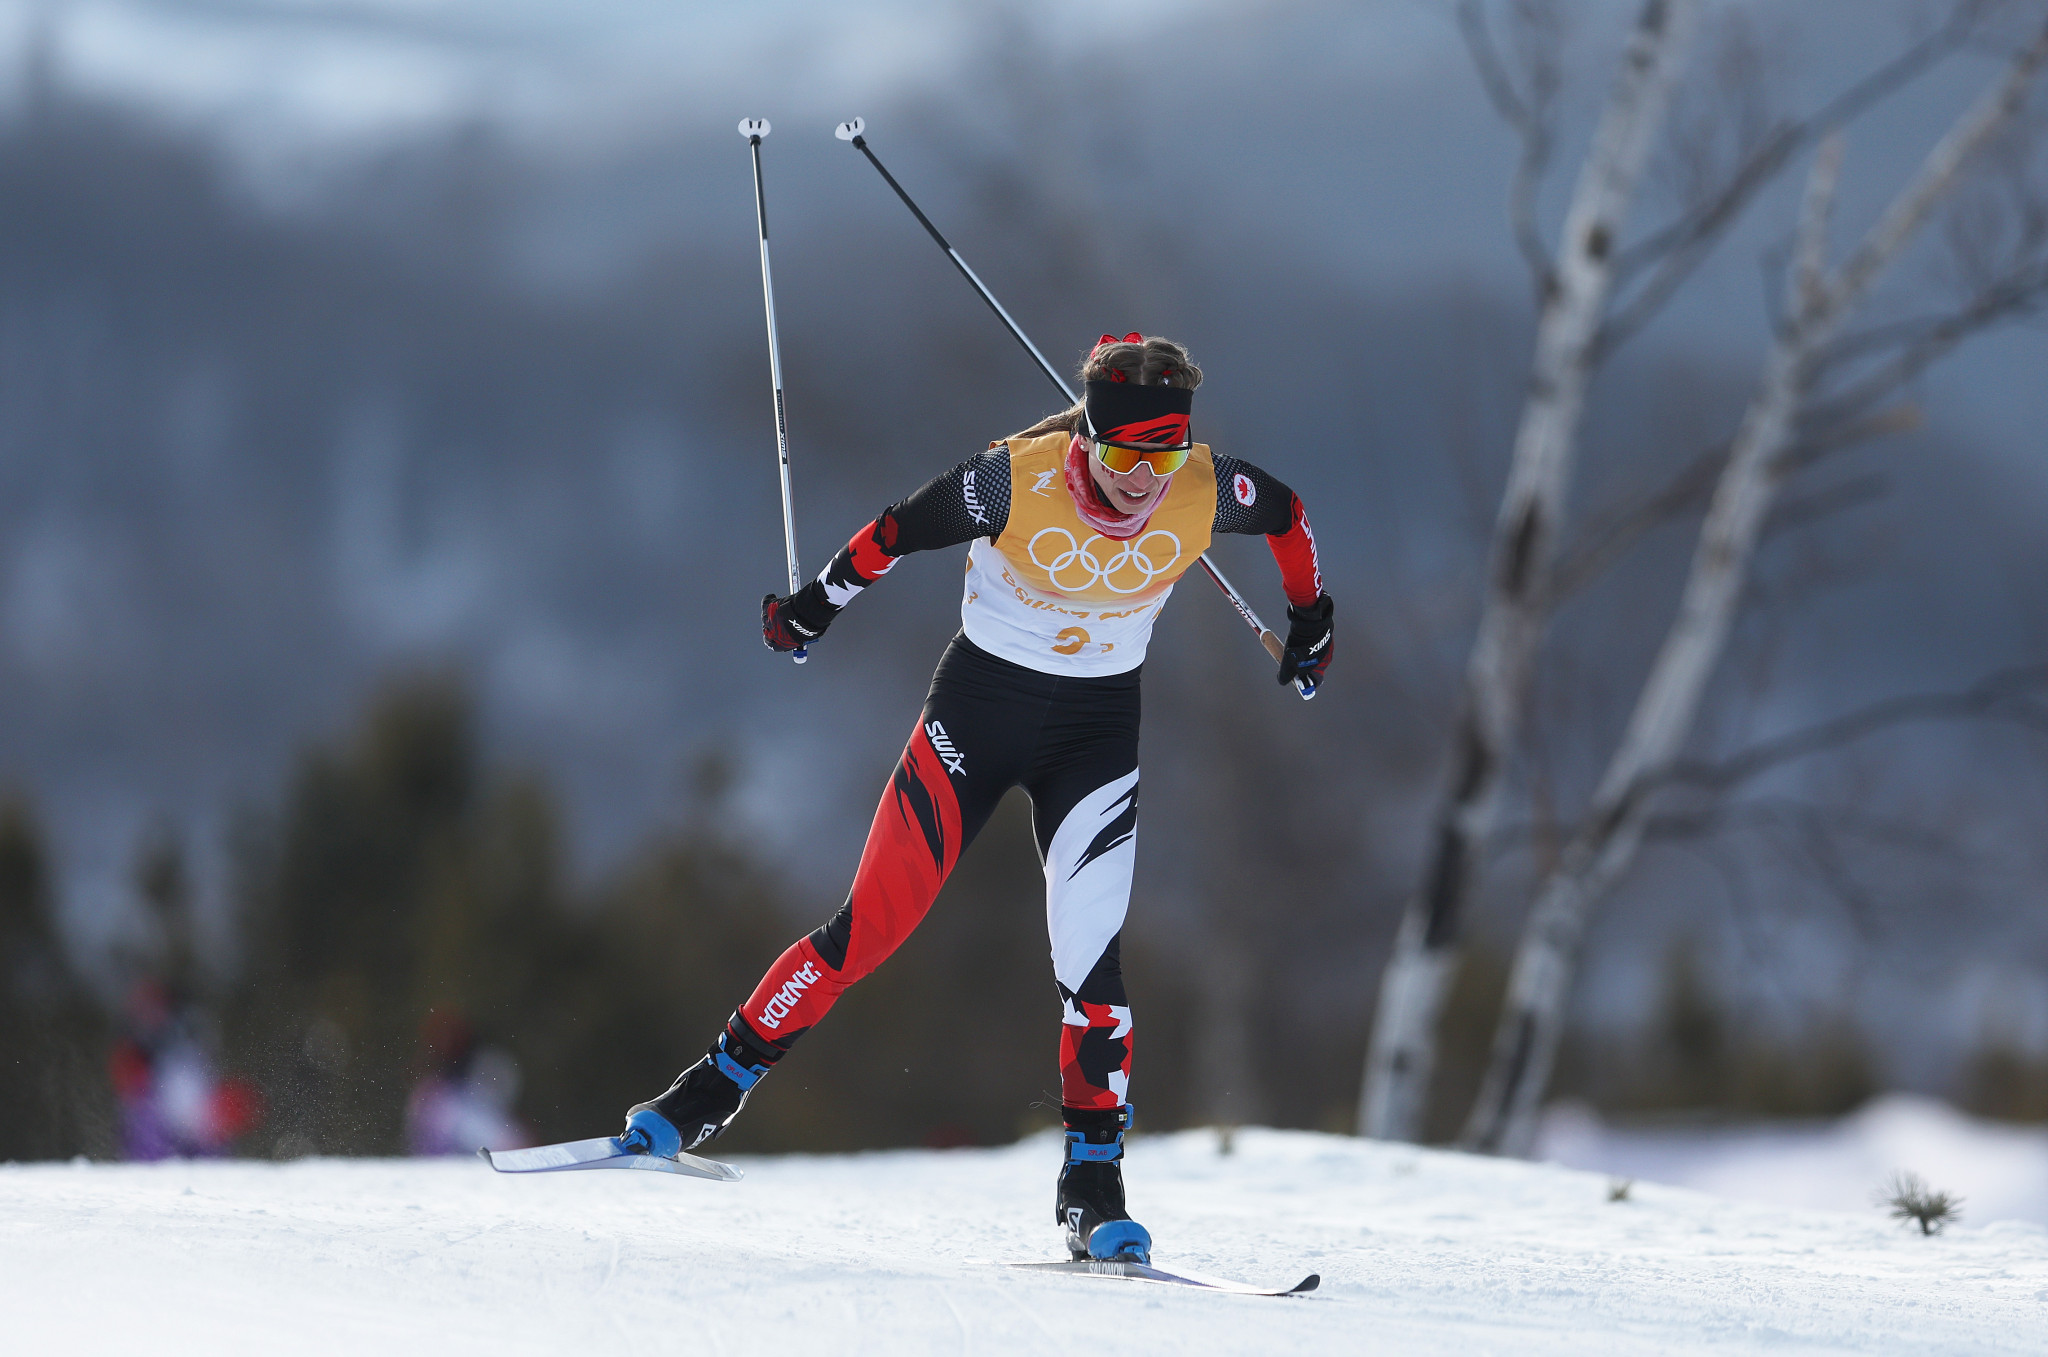 Browne wins regarded Canadian snow sports award after cross-country season